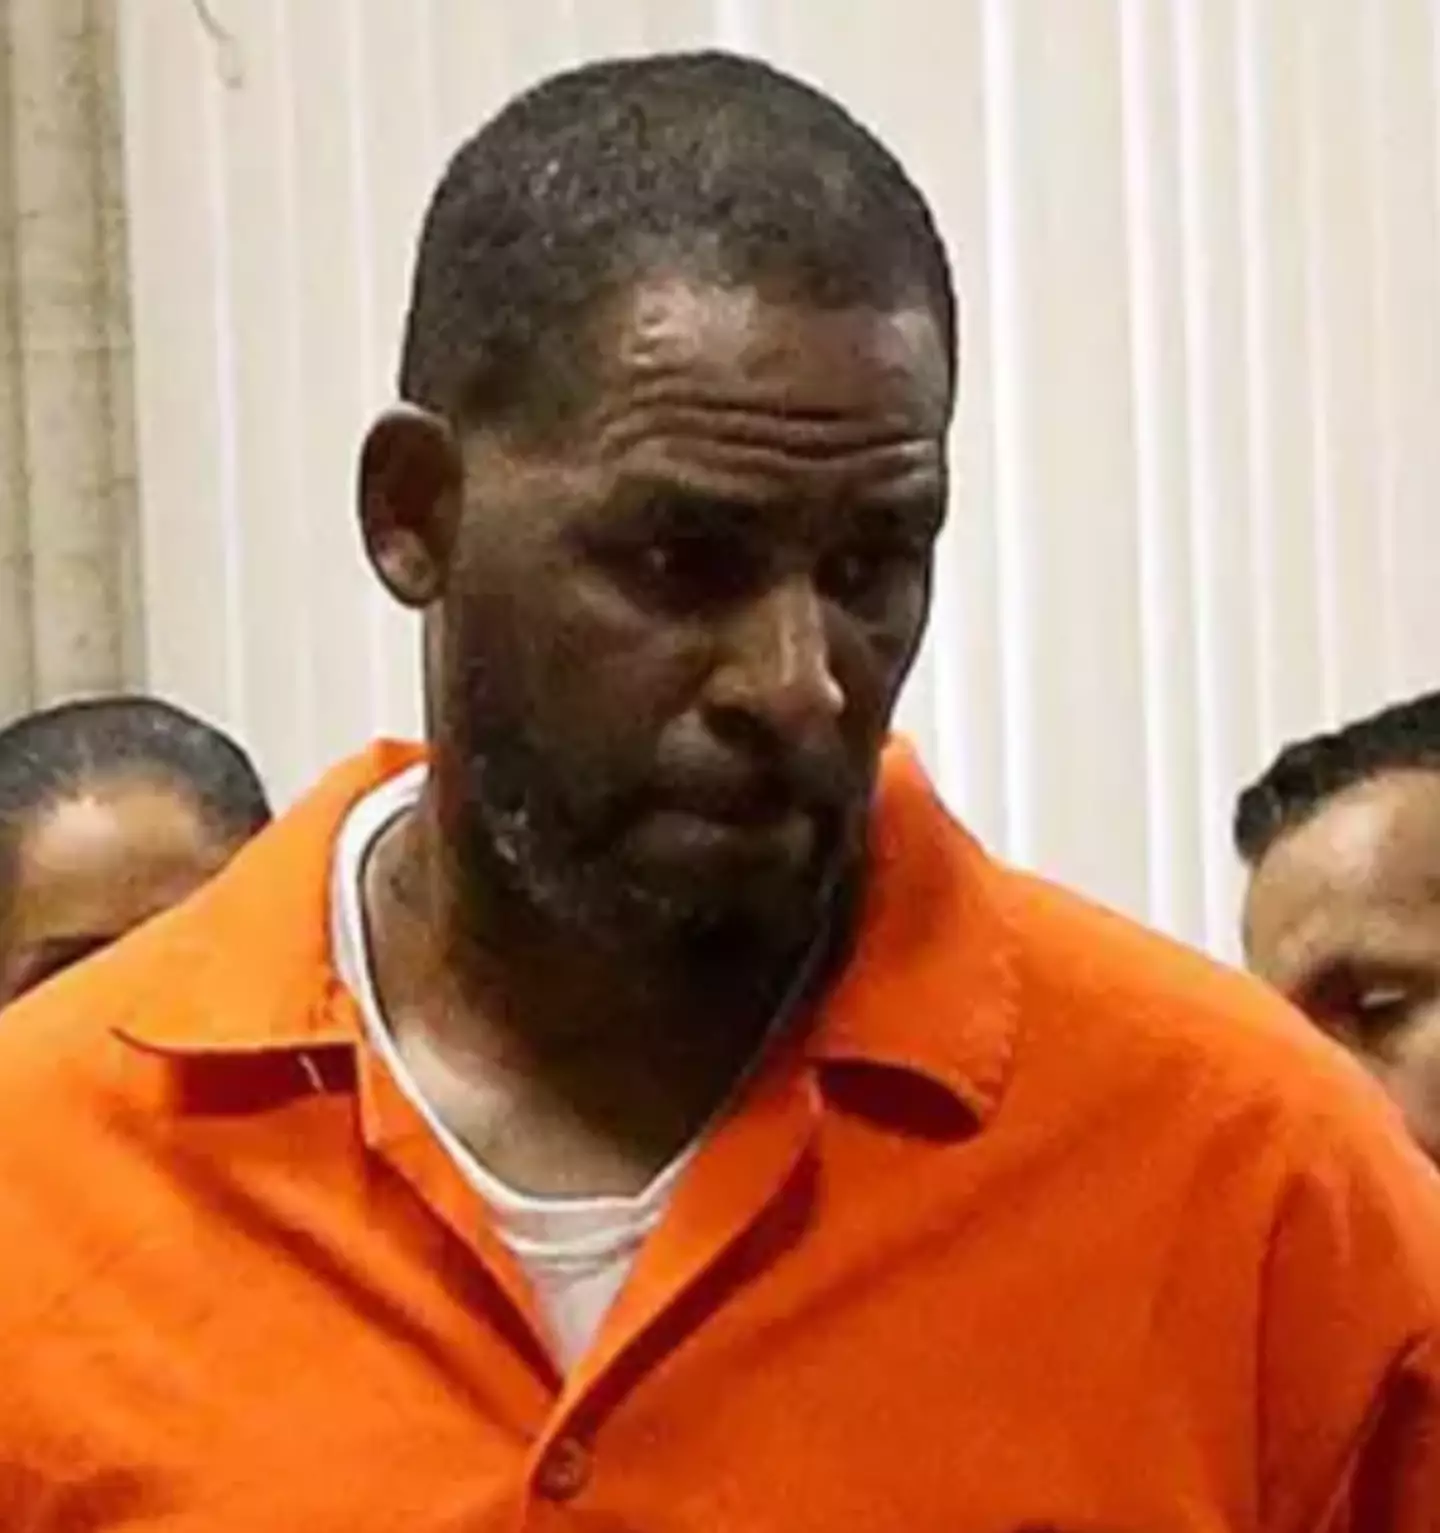 R Kelly has been convicted of numerous crimes.